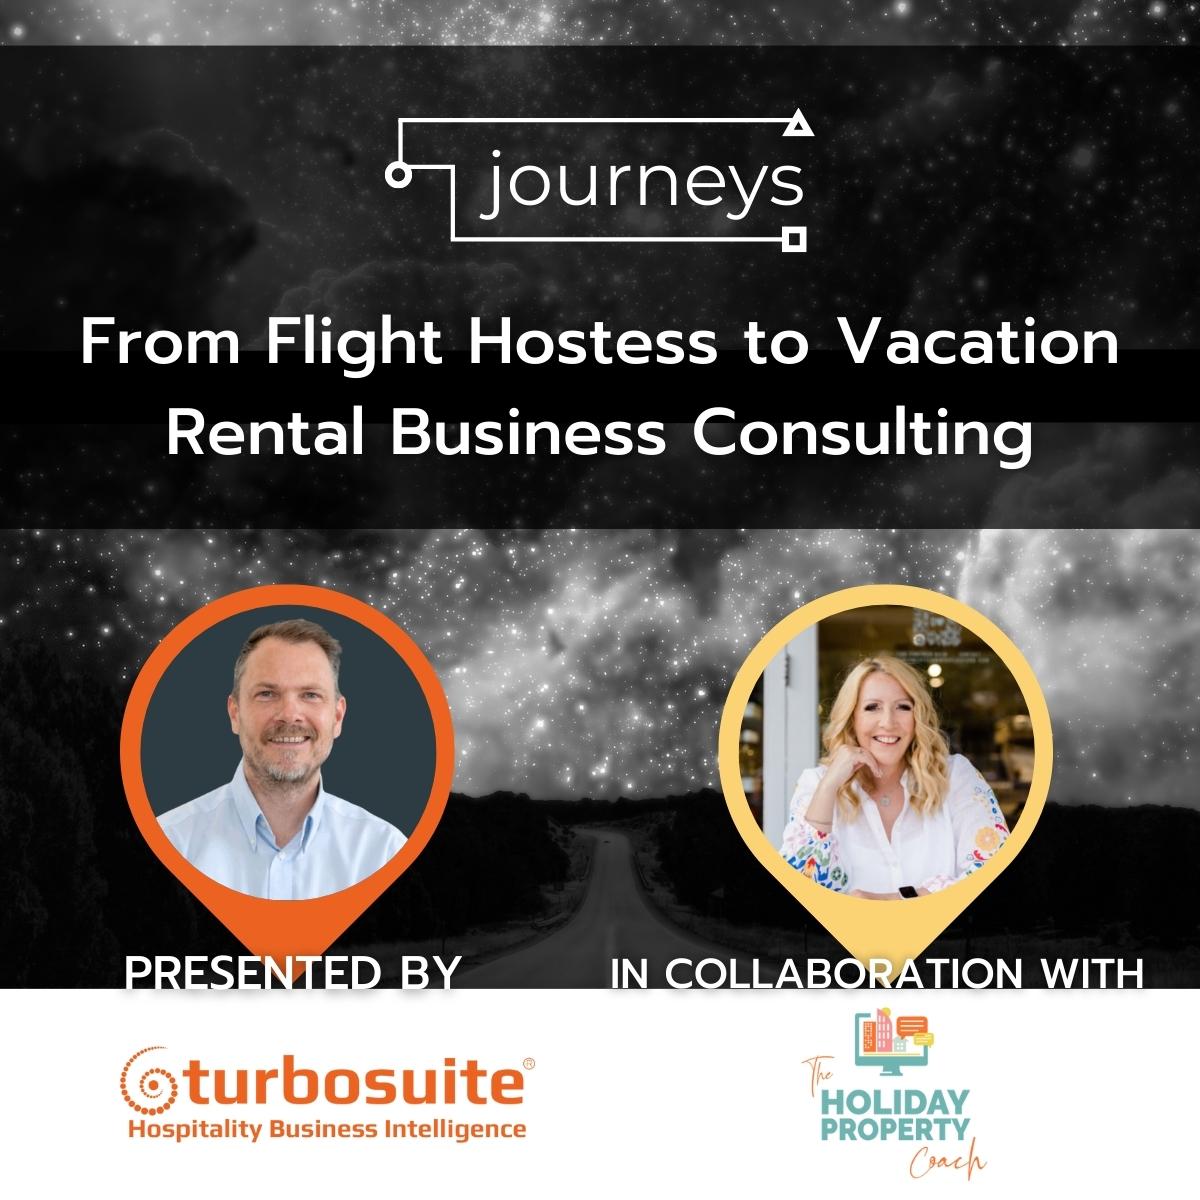 From Flight Hostess to Vacation Rental Business Consulting